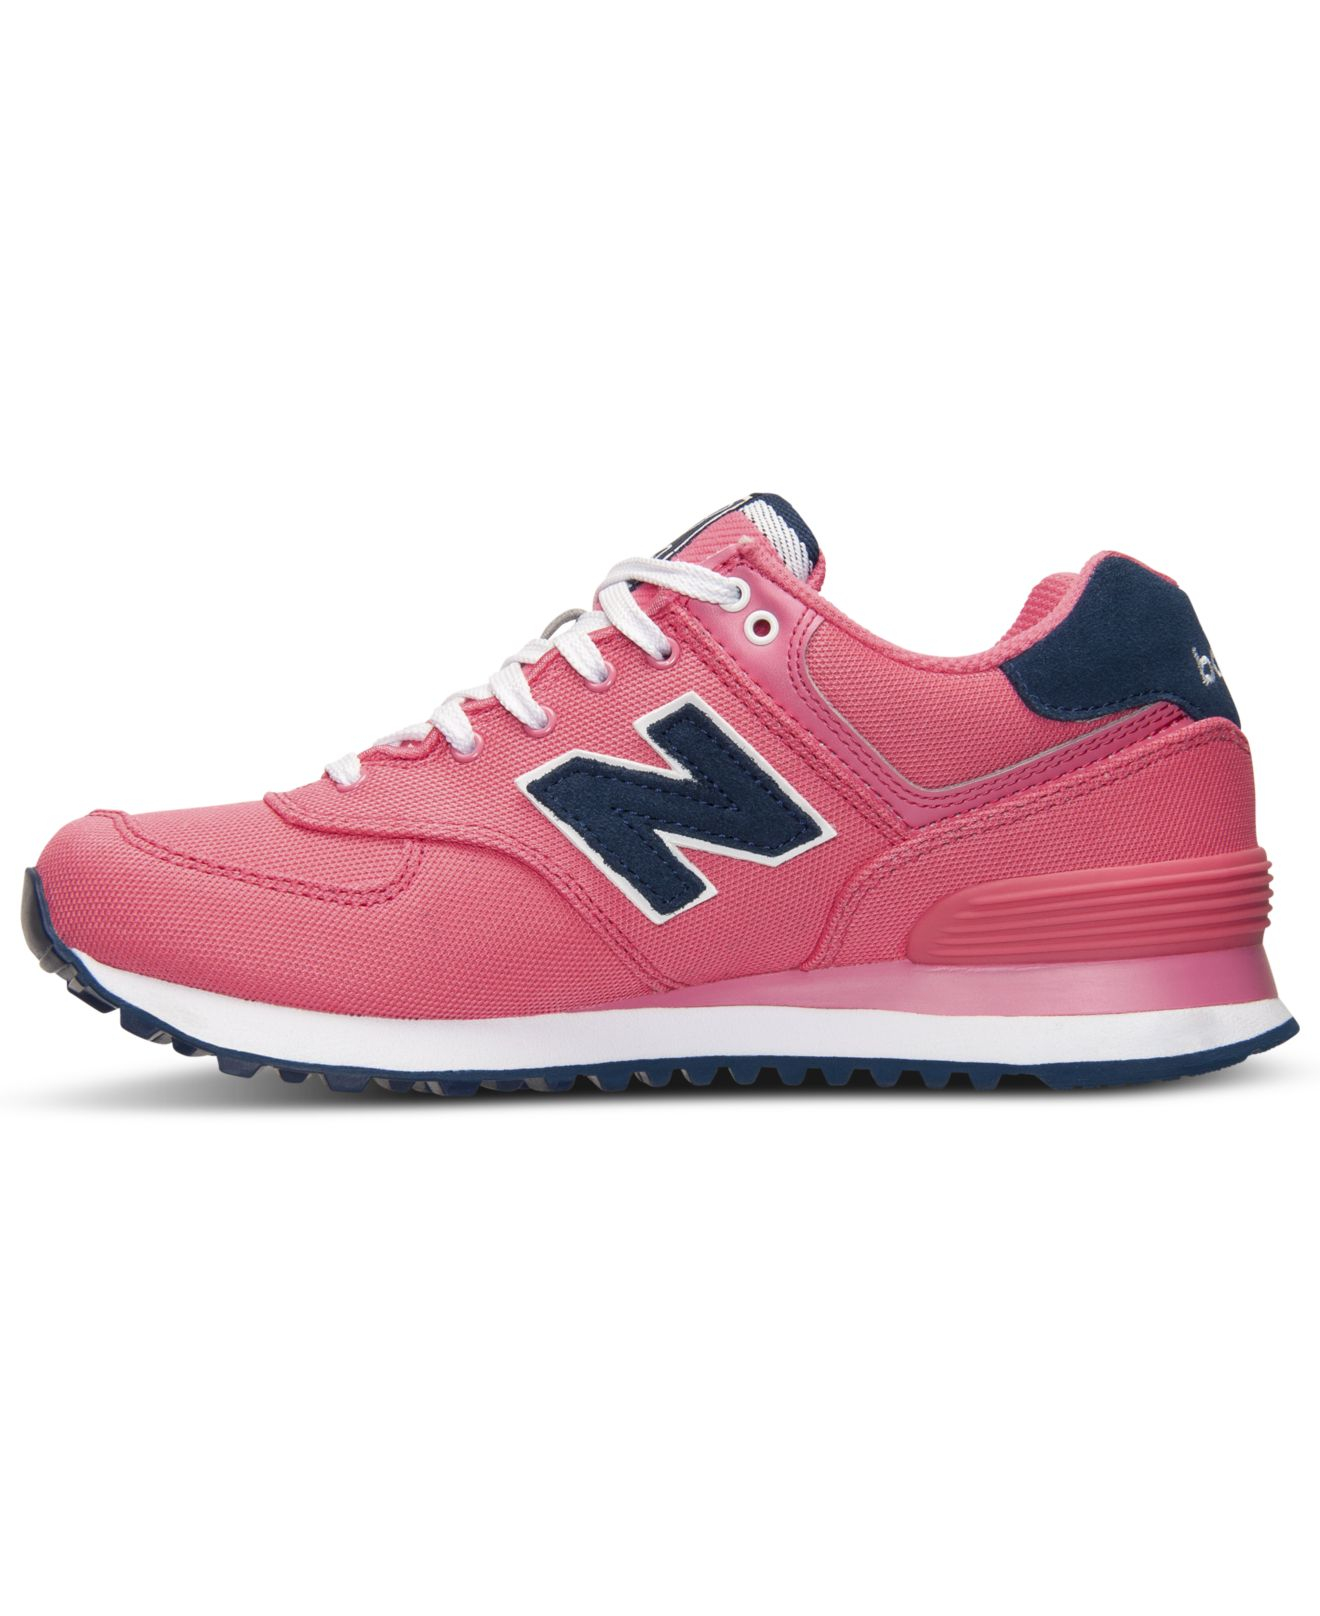 Lyst - New balance Women's 574 Casual Sneakers From Finish Line in Pink